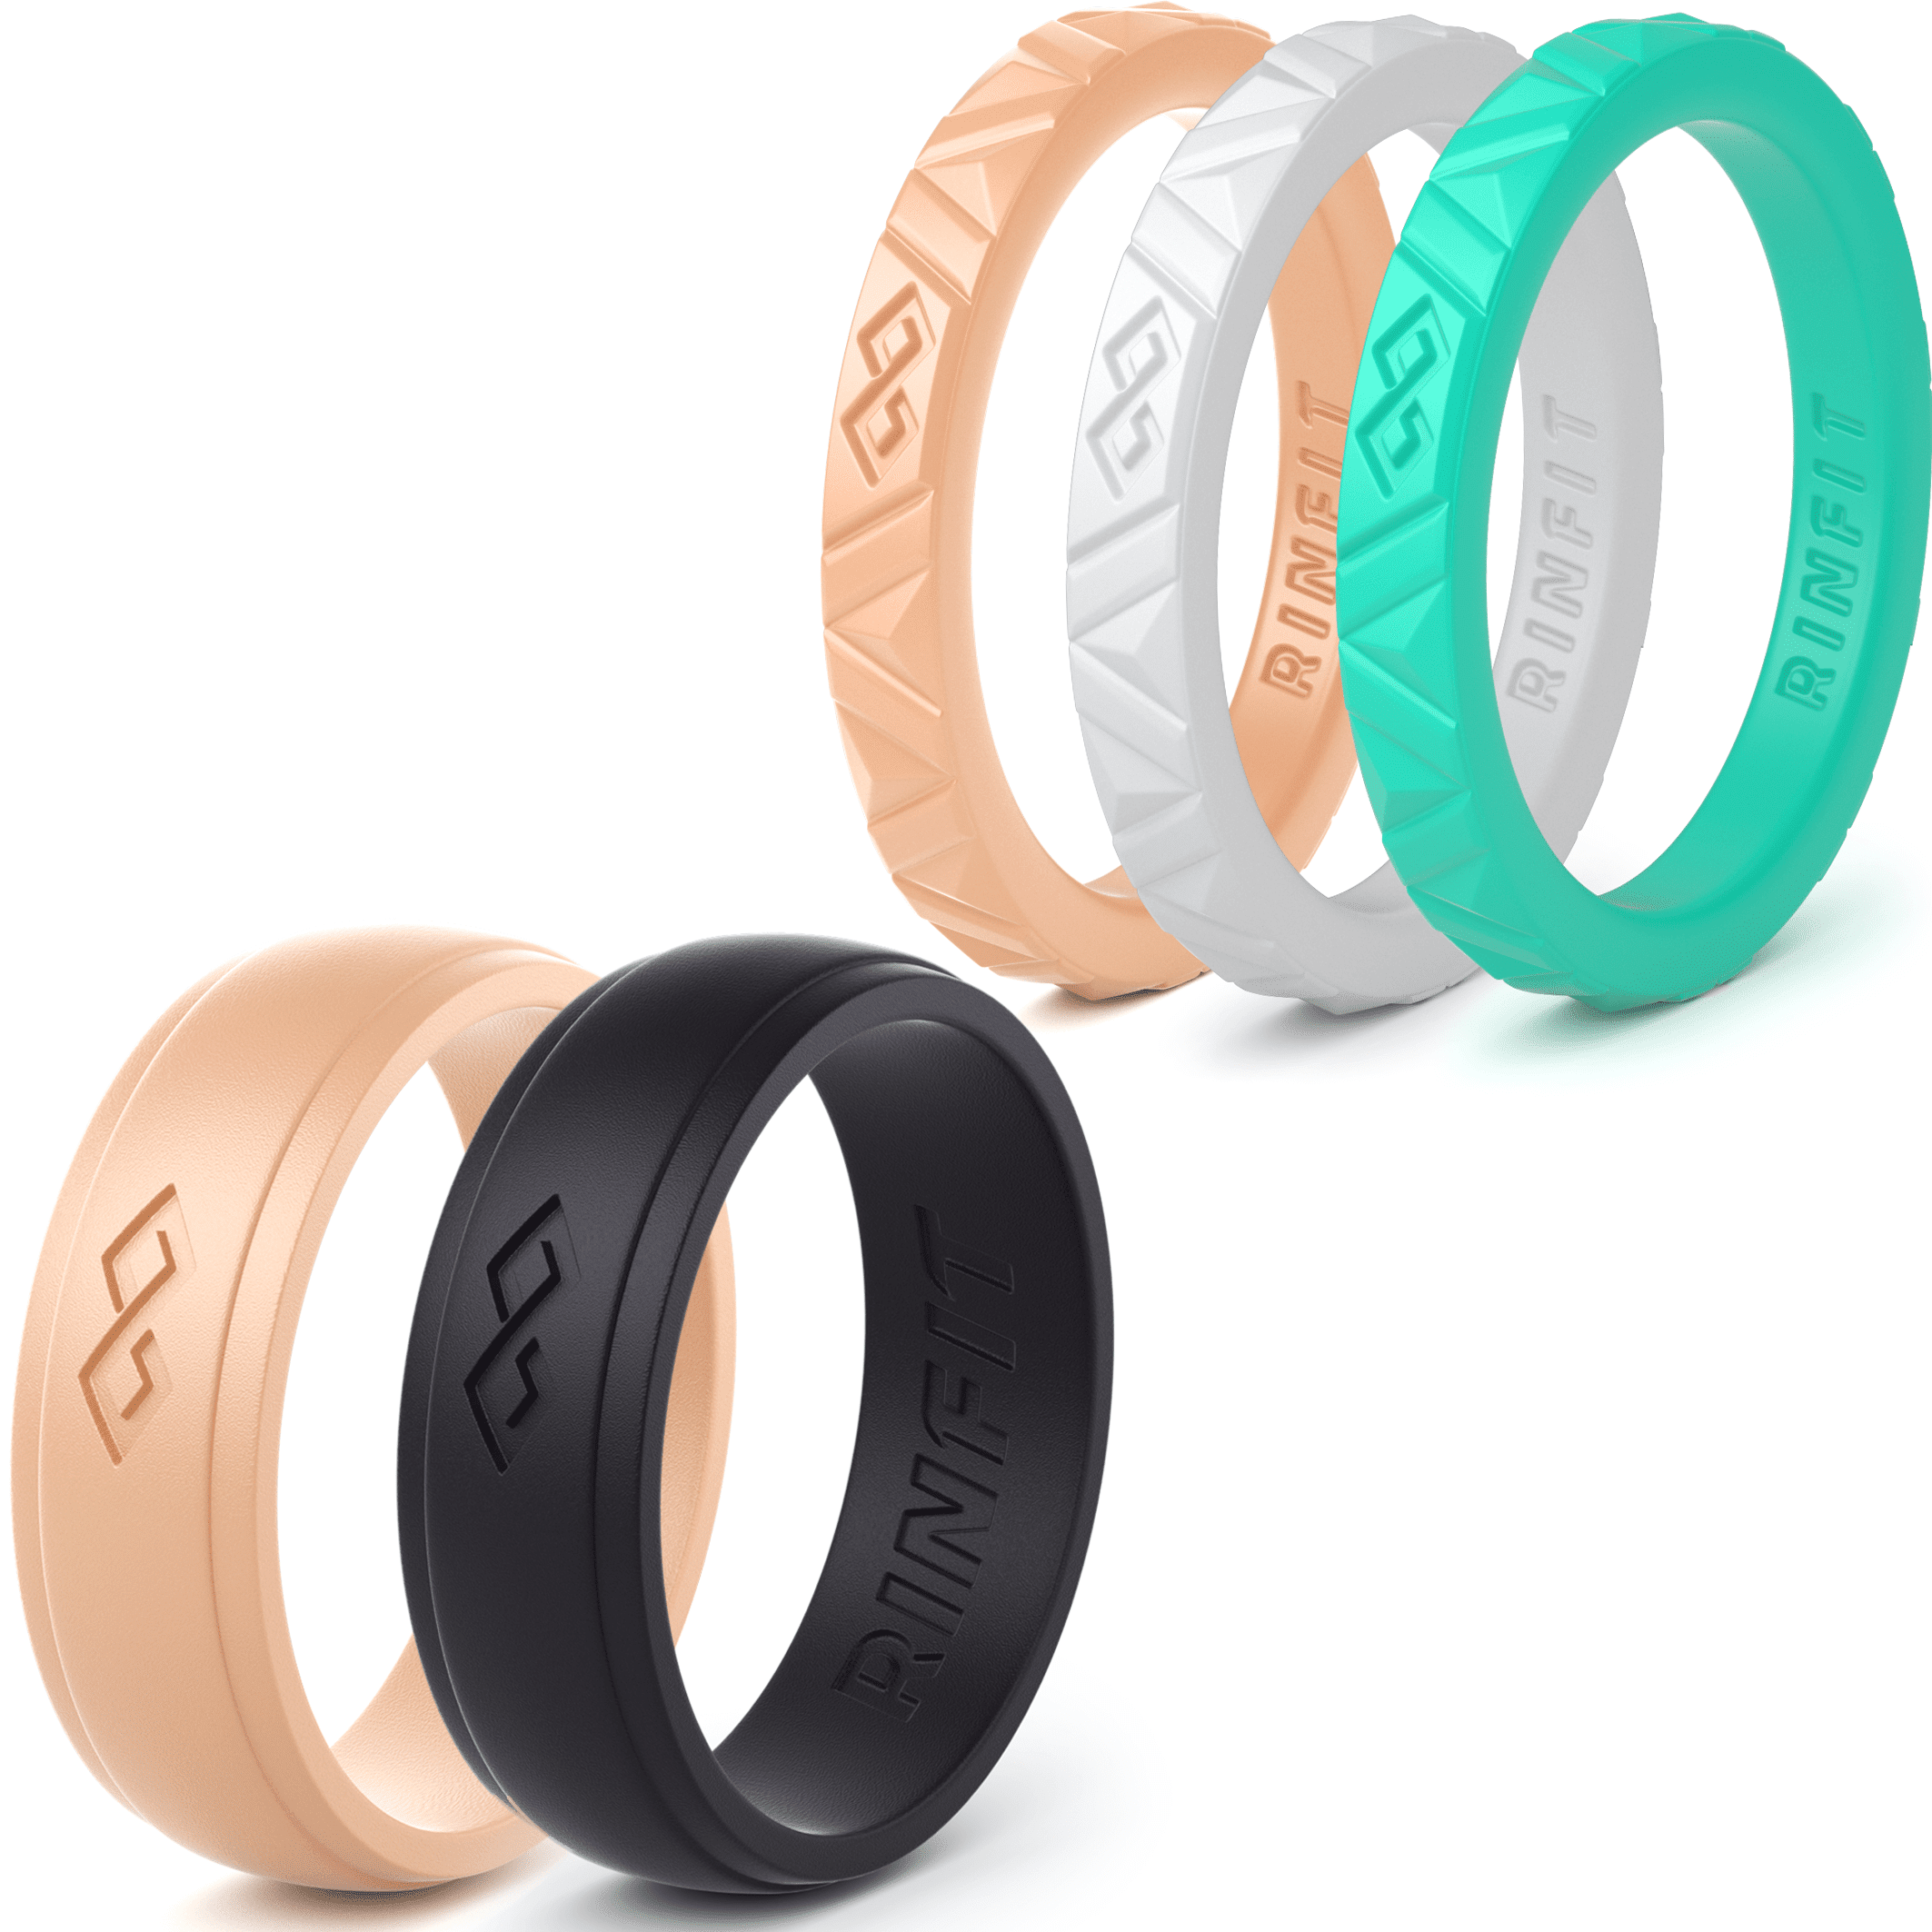 Soft Comfortable Durable Wedding Ring Replacement. Affordable Metal Free Rubber Wedding Bands Rinfit Designed Silicone Wedding Ring for Women Set of Thin and Stackable Rings 3 Pack & 4 Pack